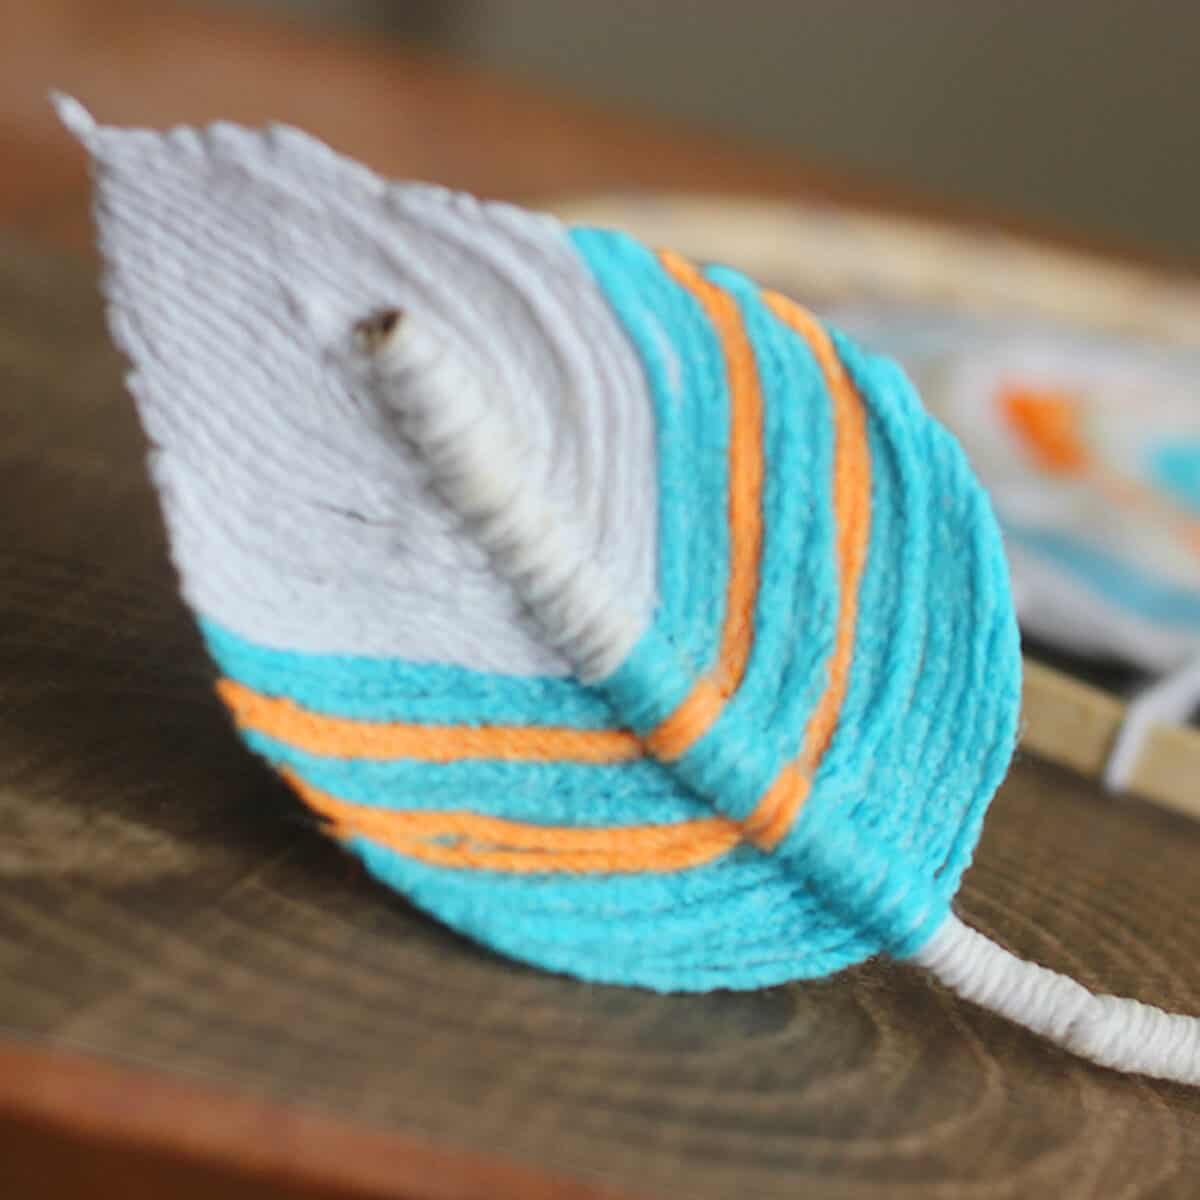 Fiber Feather created with yarn in blue, orange, and white colors.